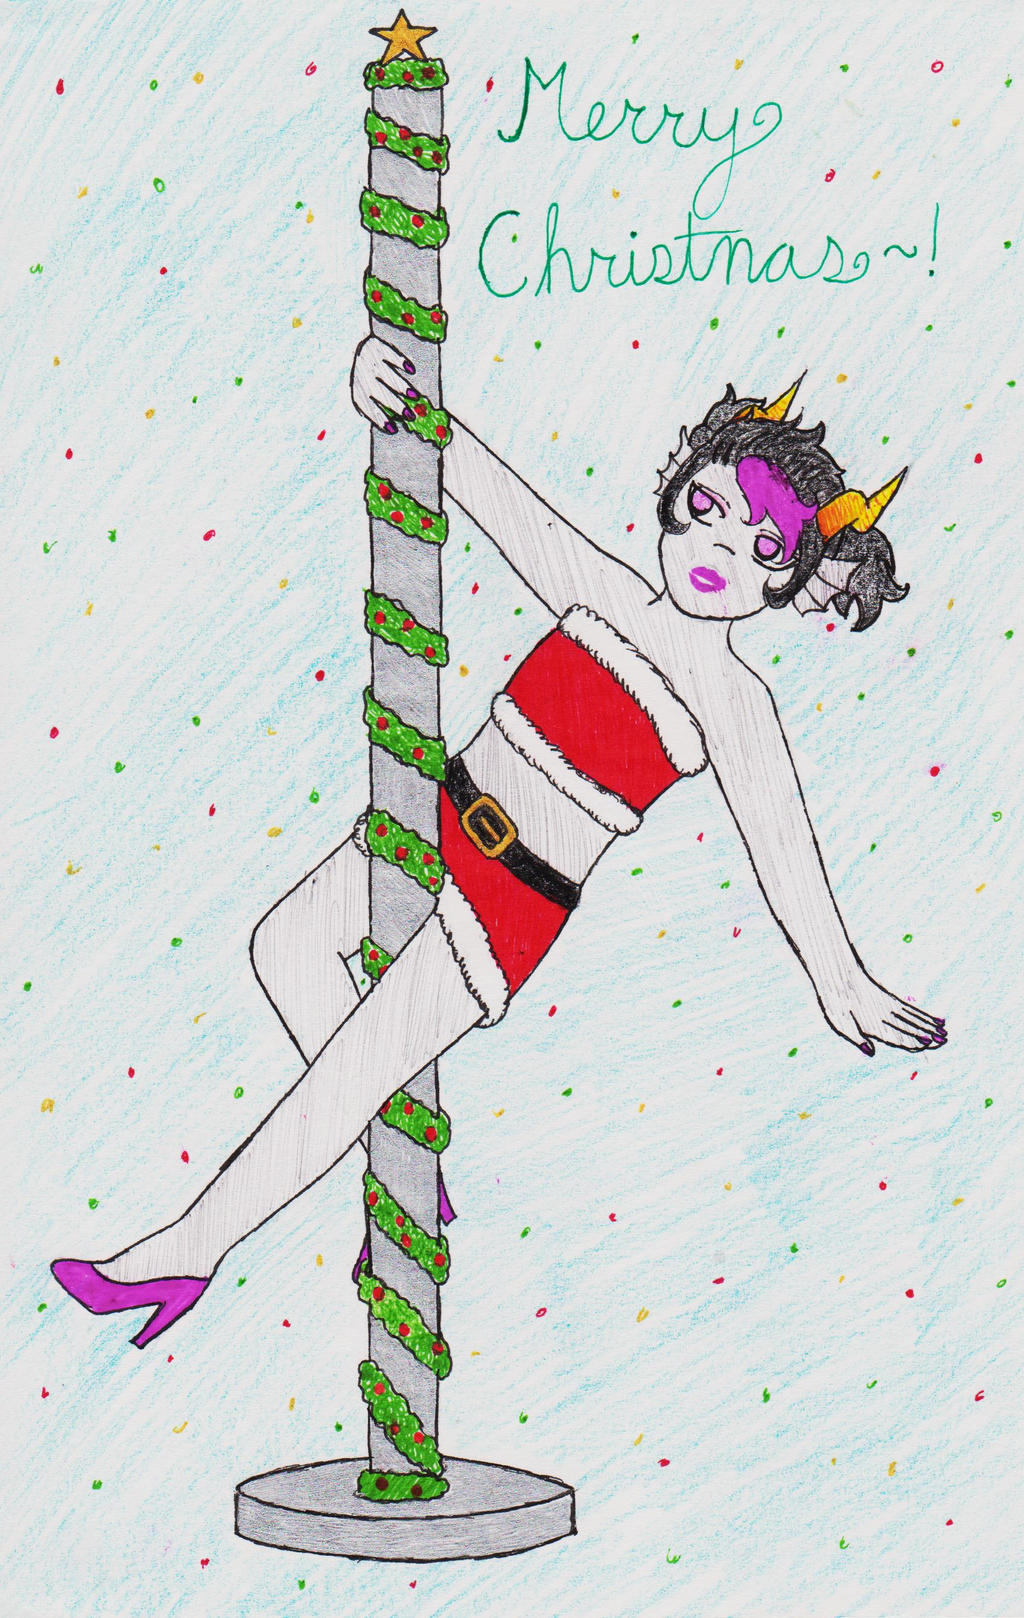 Merry Xmas from your favorite ho ho hoe! by ChrysanthemumMoon on 